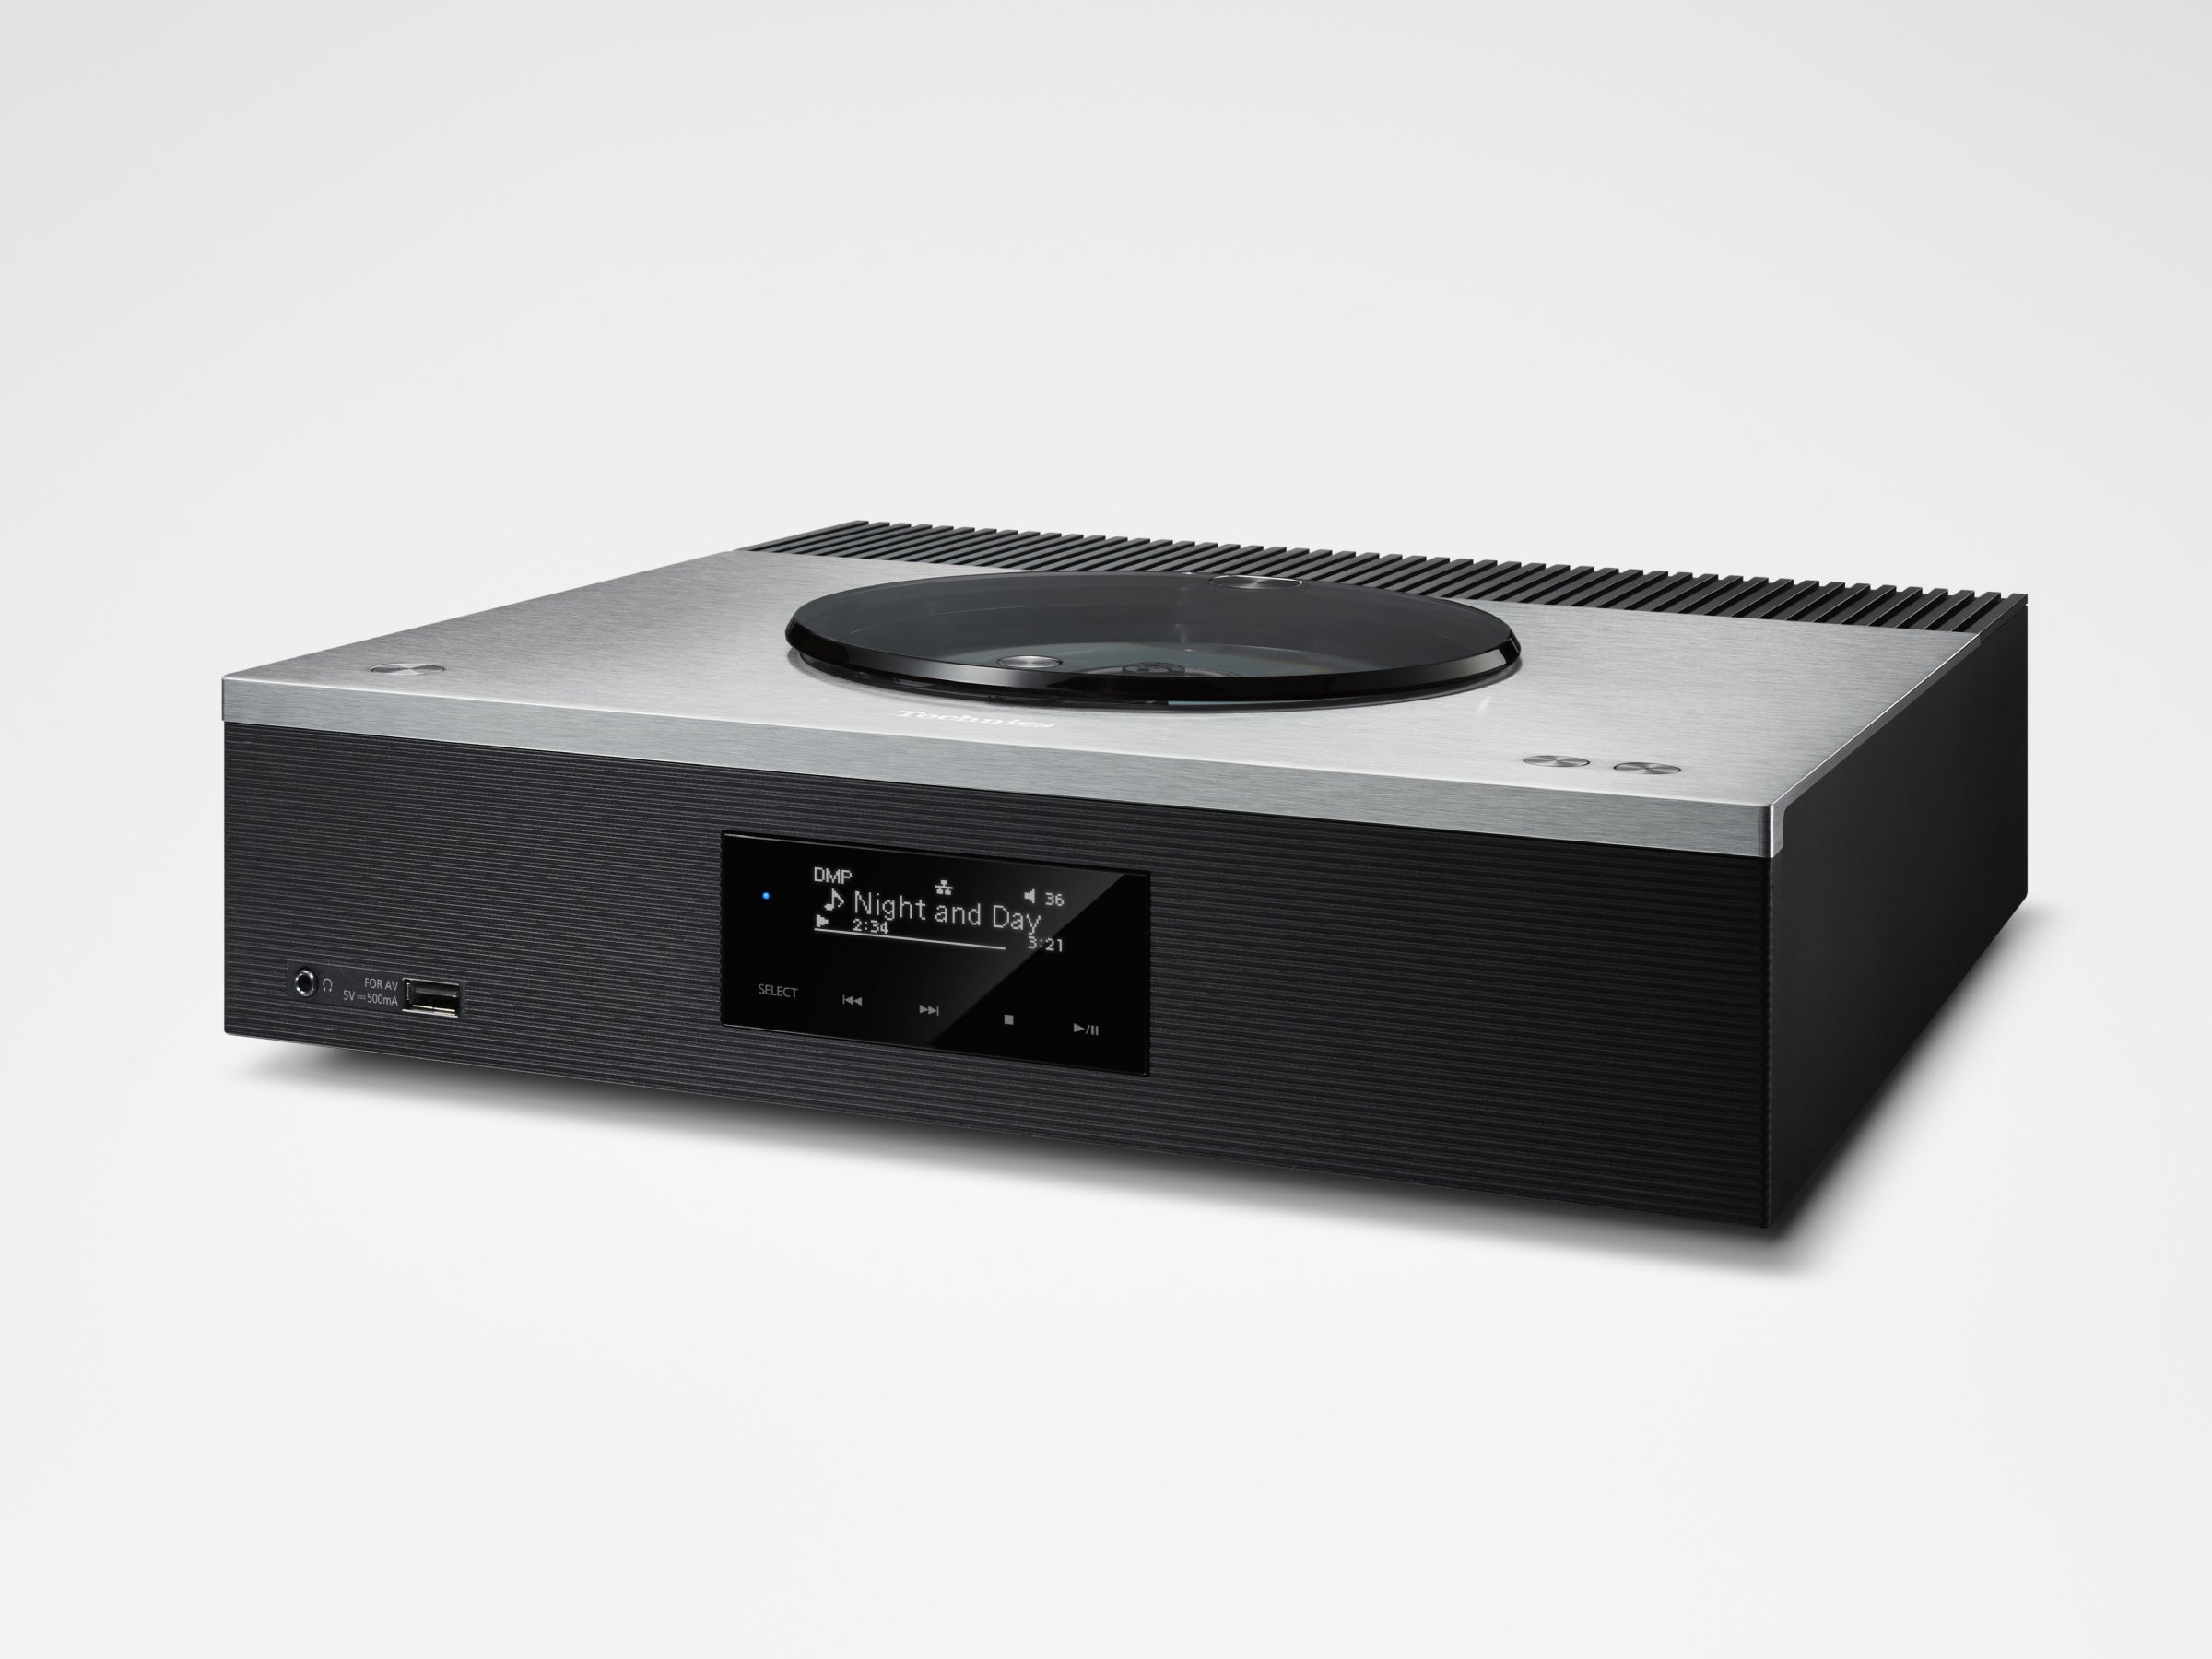 Technics SA-C600 All-in-One Player